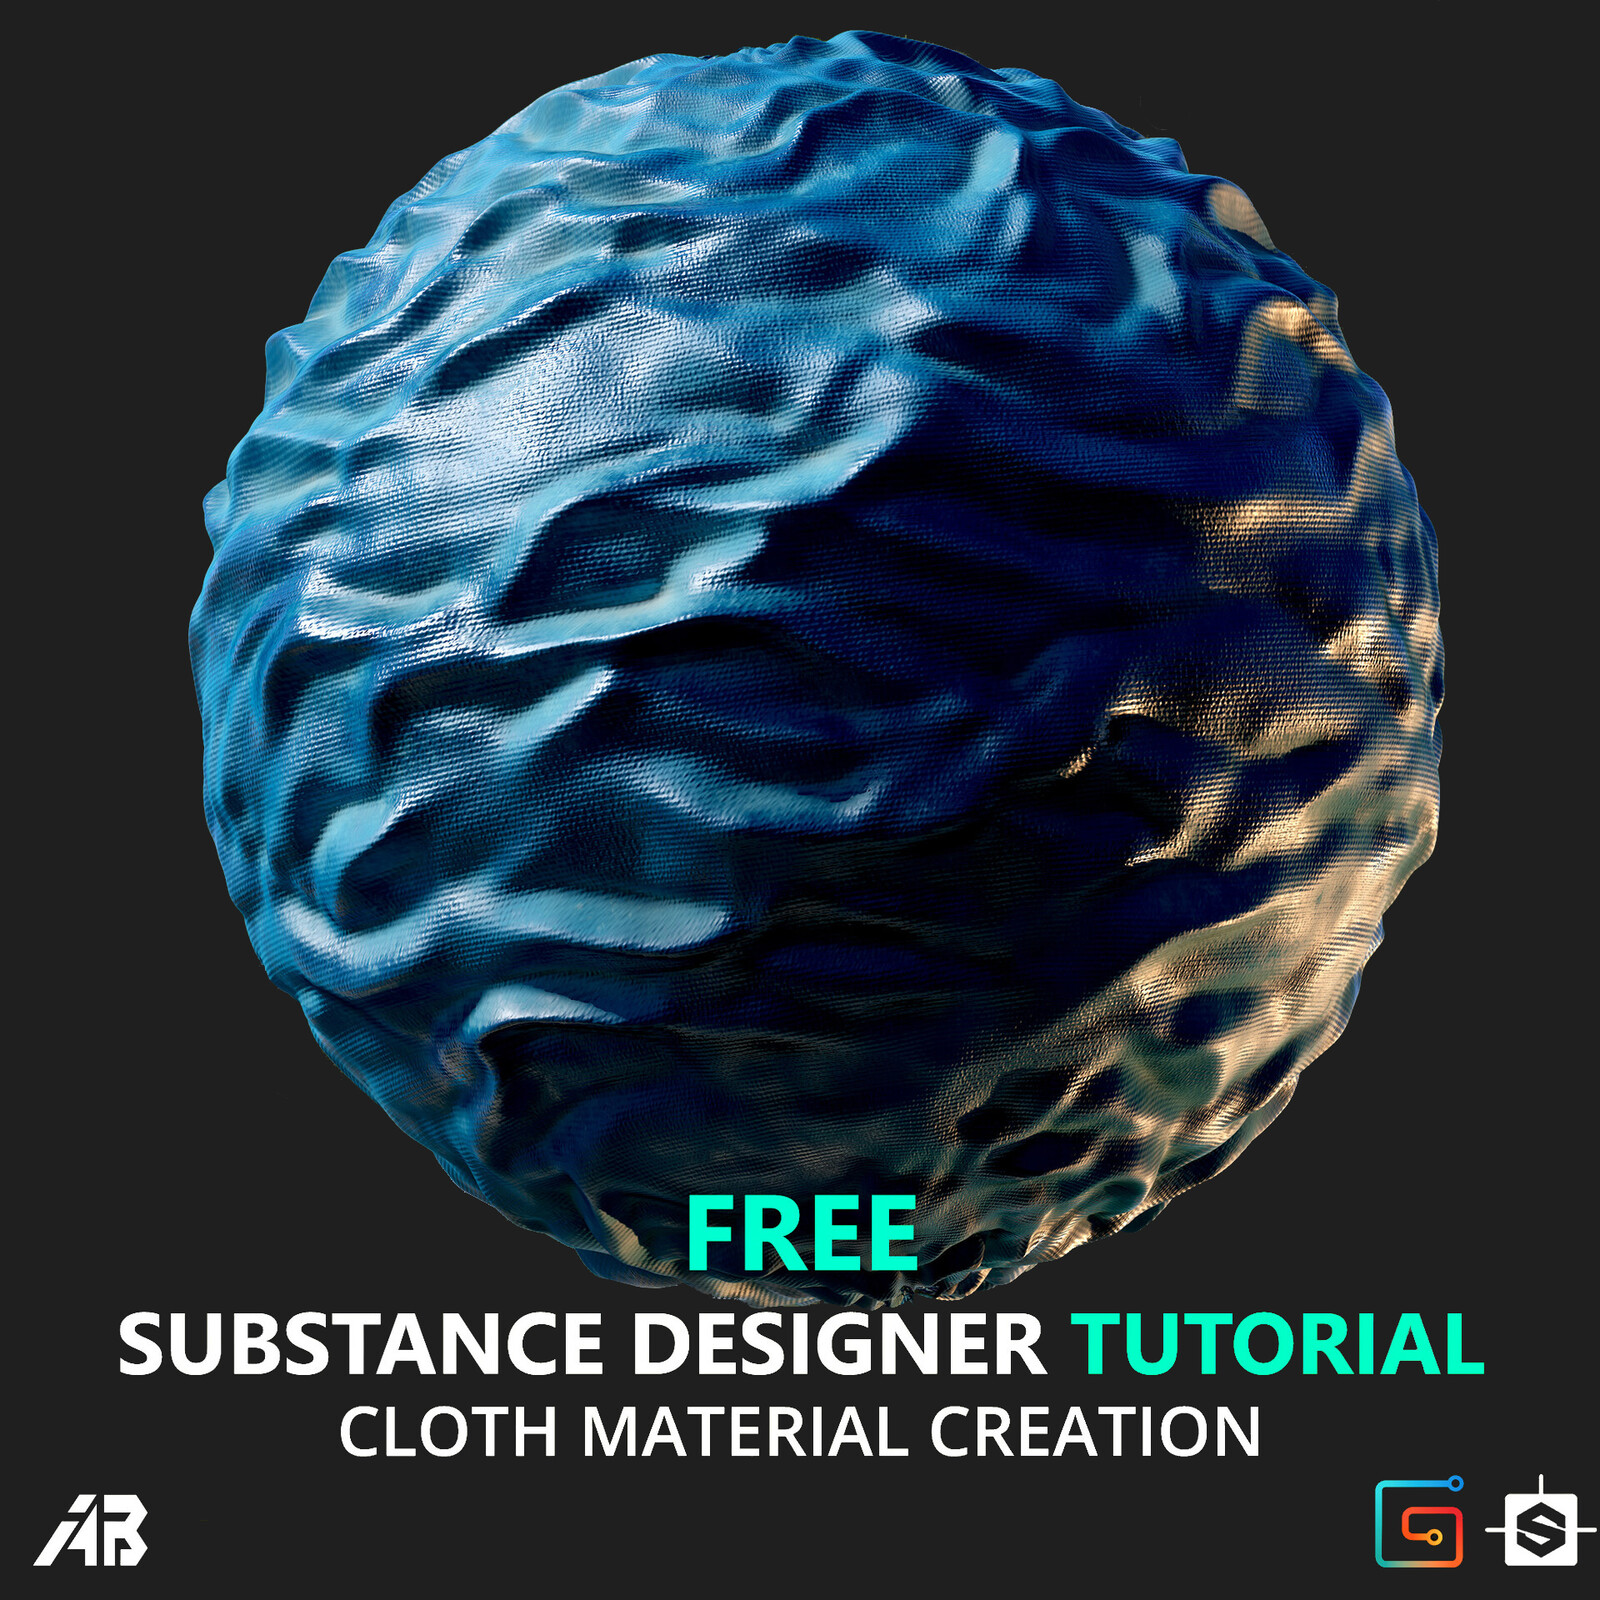 FREE TUTORIAL - Cloth Material Creation in Substance Designer